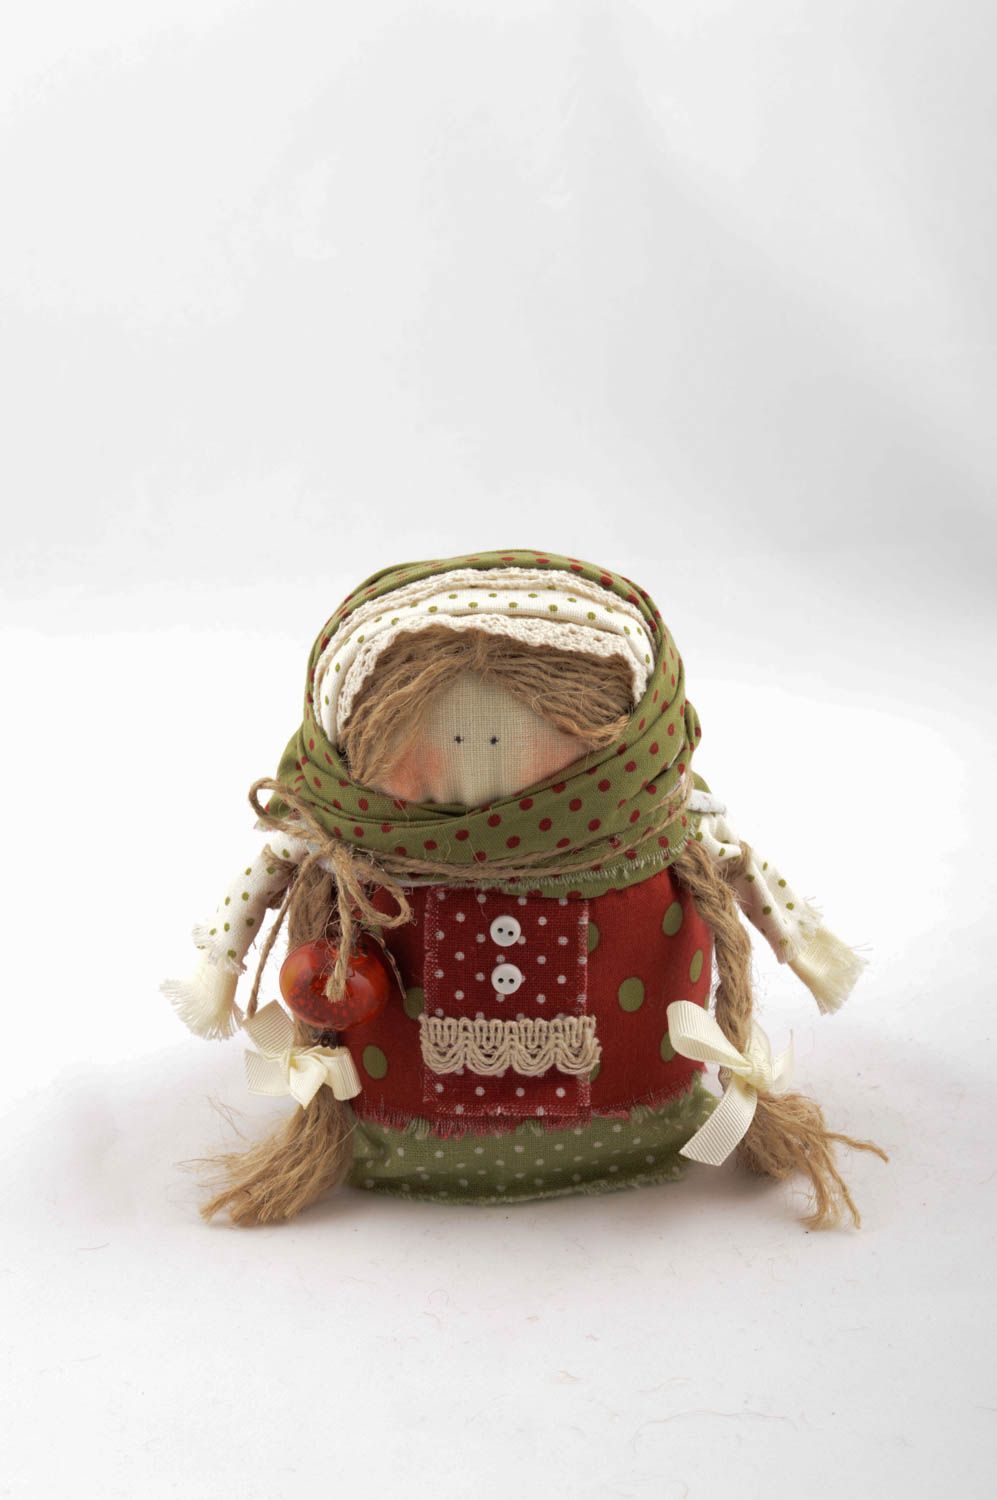 Handmade soft doll protective amulet home amulet rustic home decor unique gifts photo 2